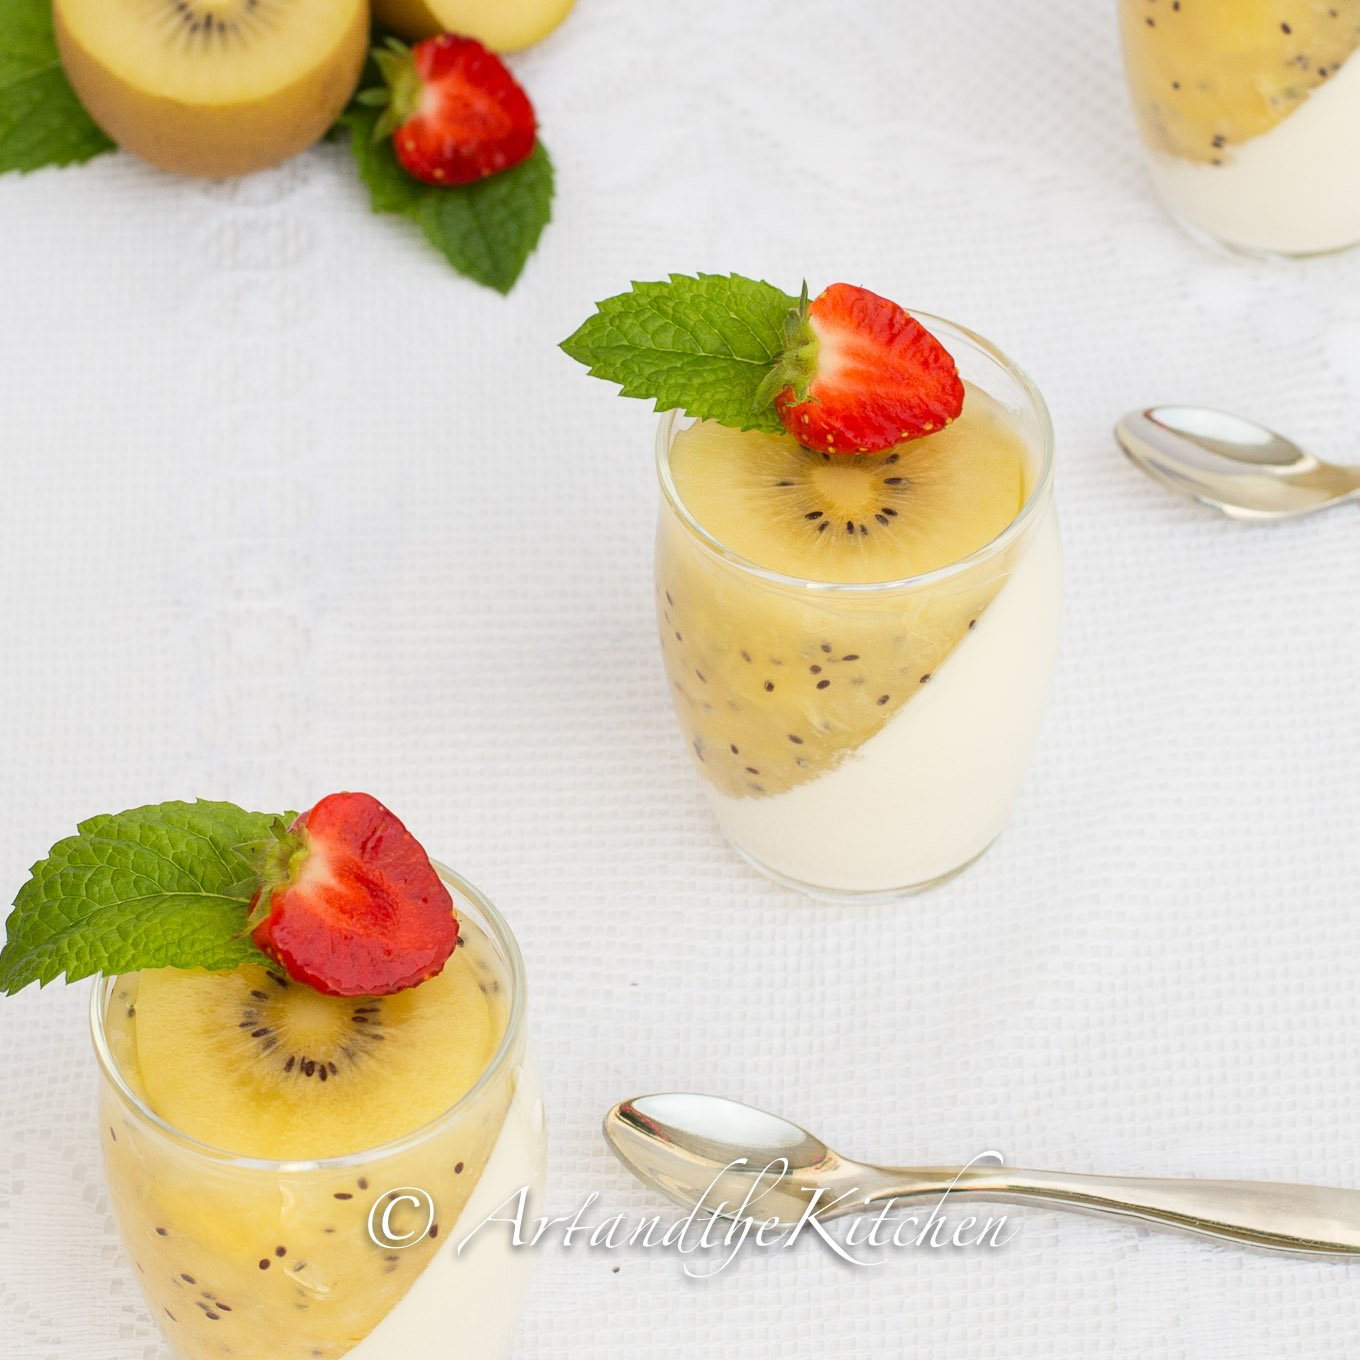 Glass jars filled with panna cotta and kiwi puree topped with mint and strawberry slice.